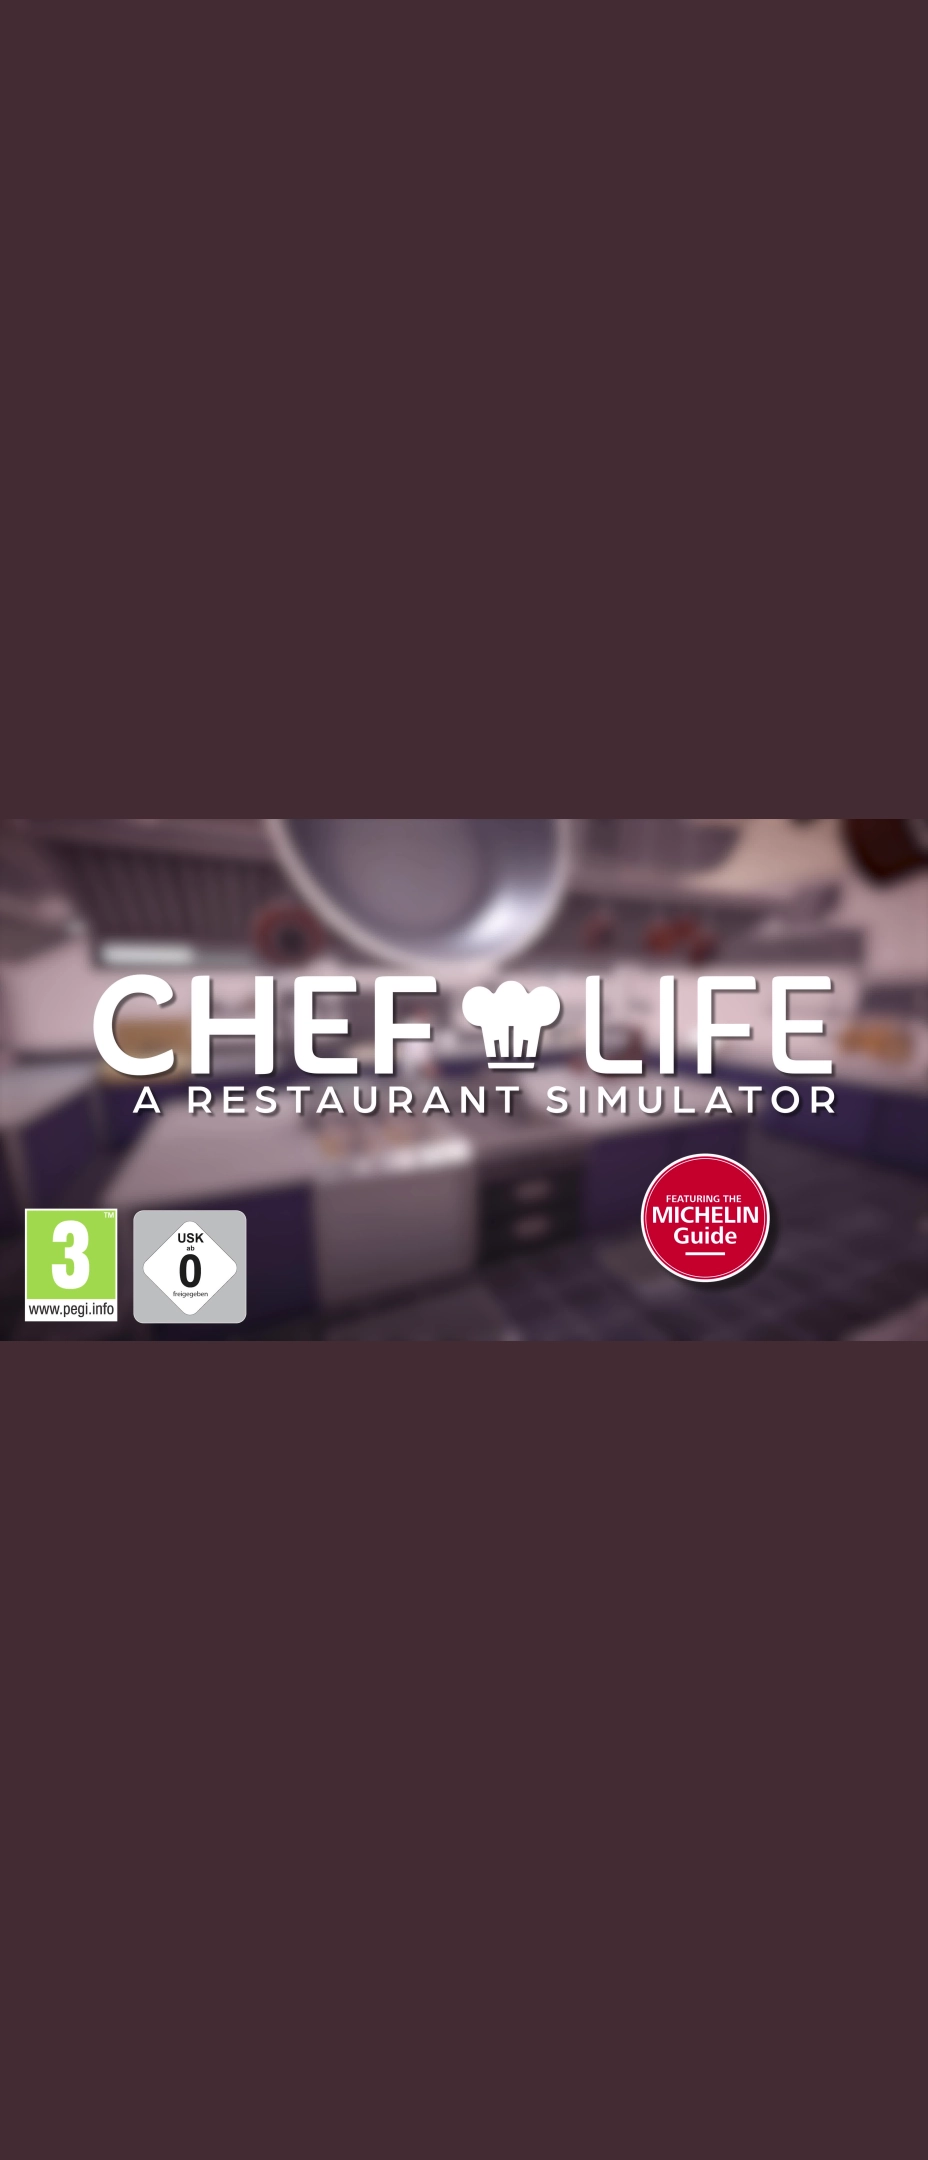 Chef Life: A Restaurant Simulator - Commented Gameplay Trailer [GER]